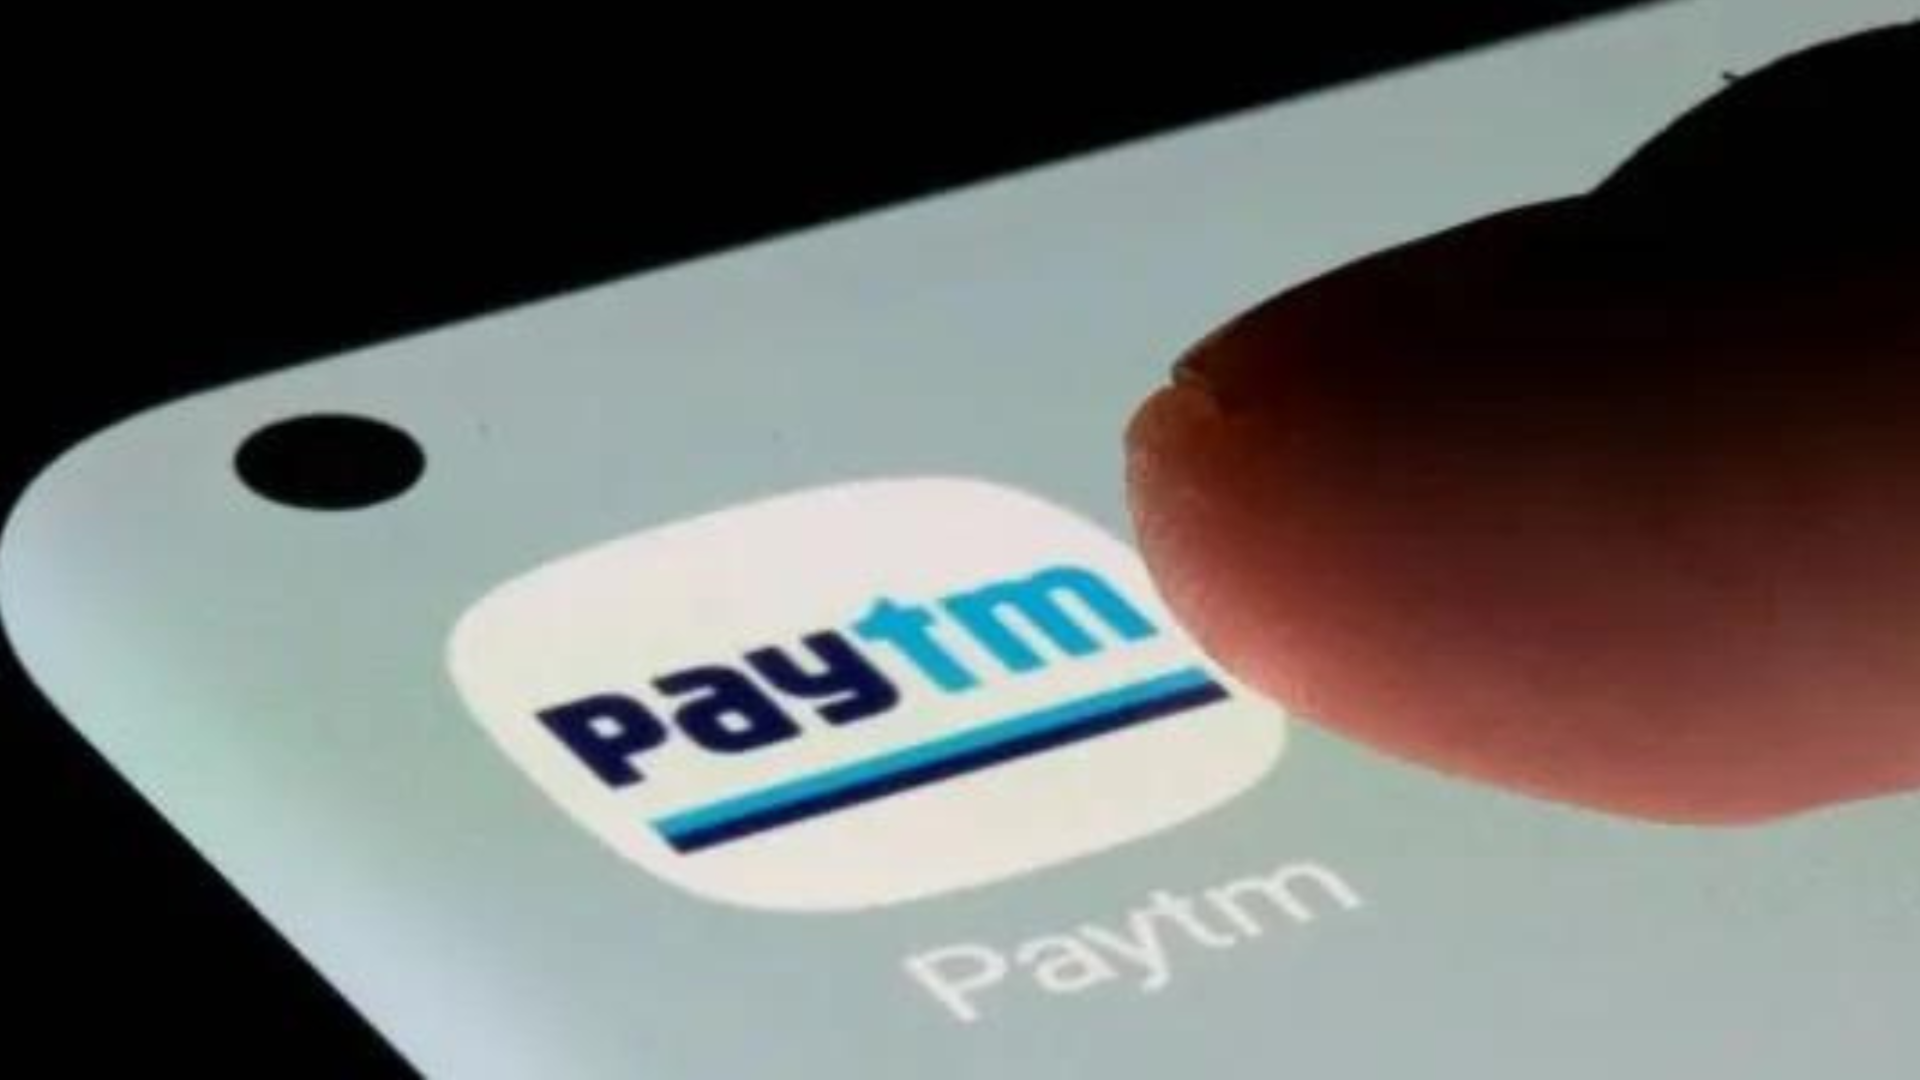 Market Share Of Paytm Continues To Fall After RBI Crackdown